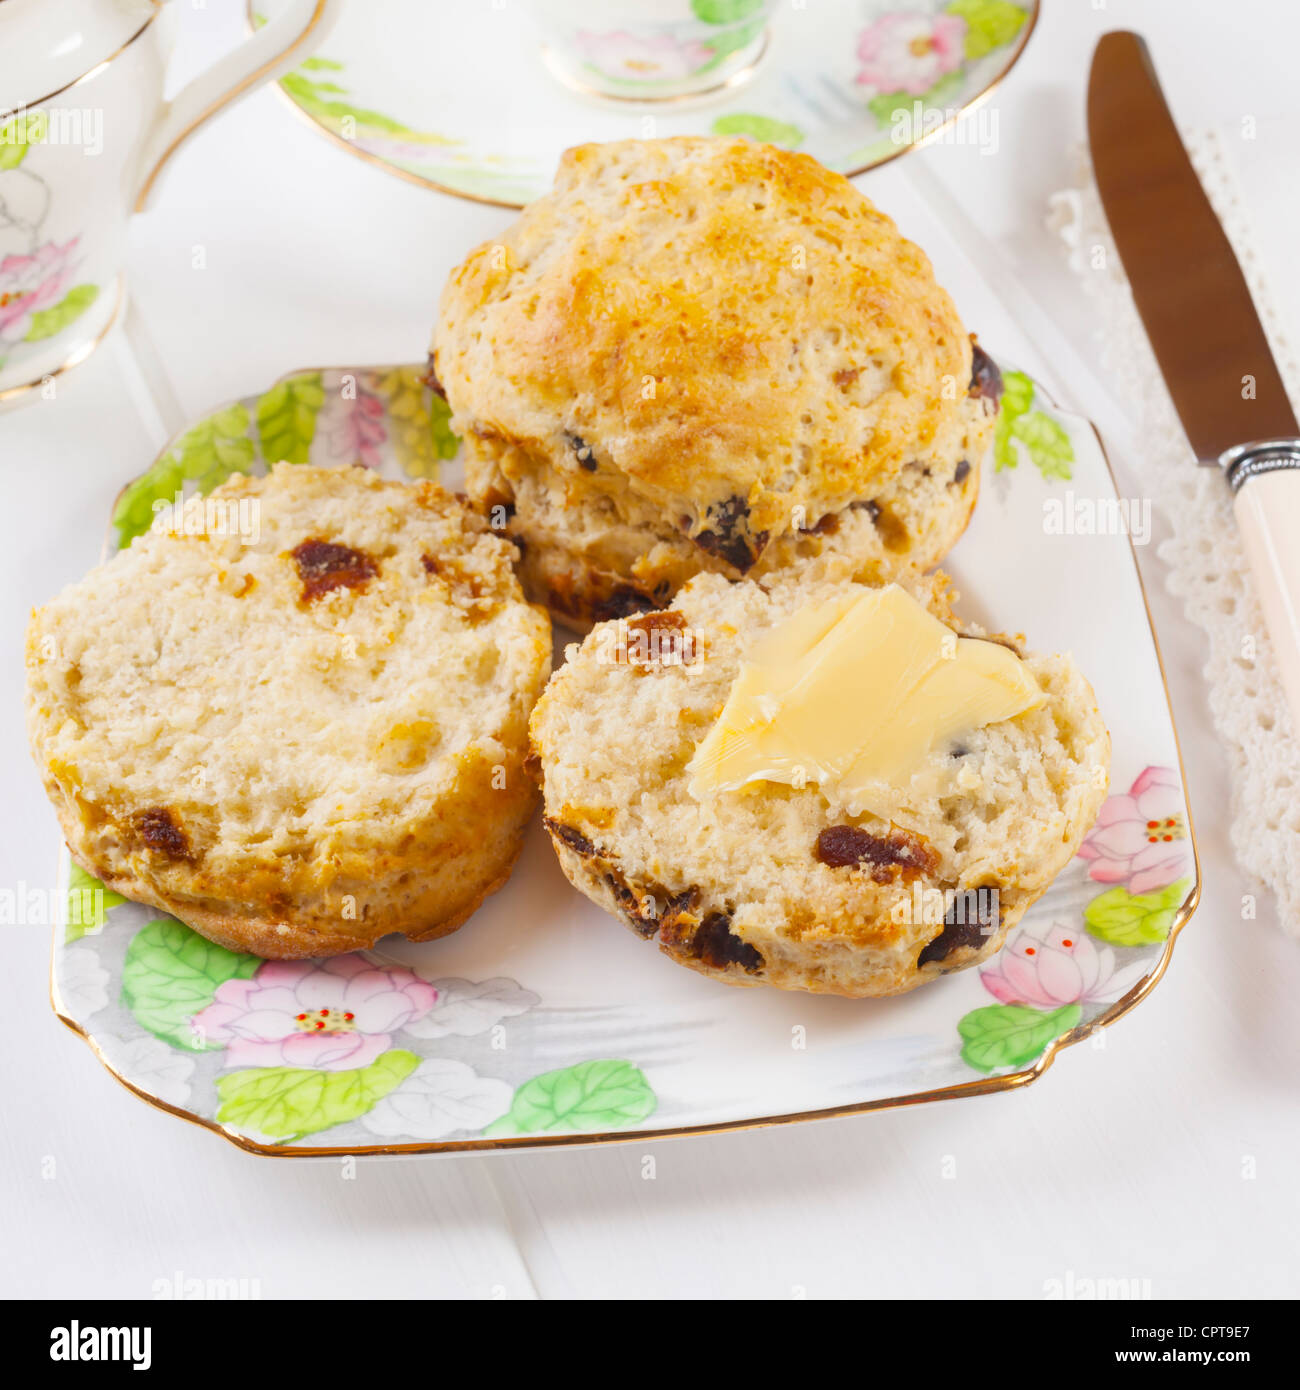 Two date scones with butter and a cup of tea, arranged on beatiful old crockery. Stock Photo